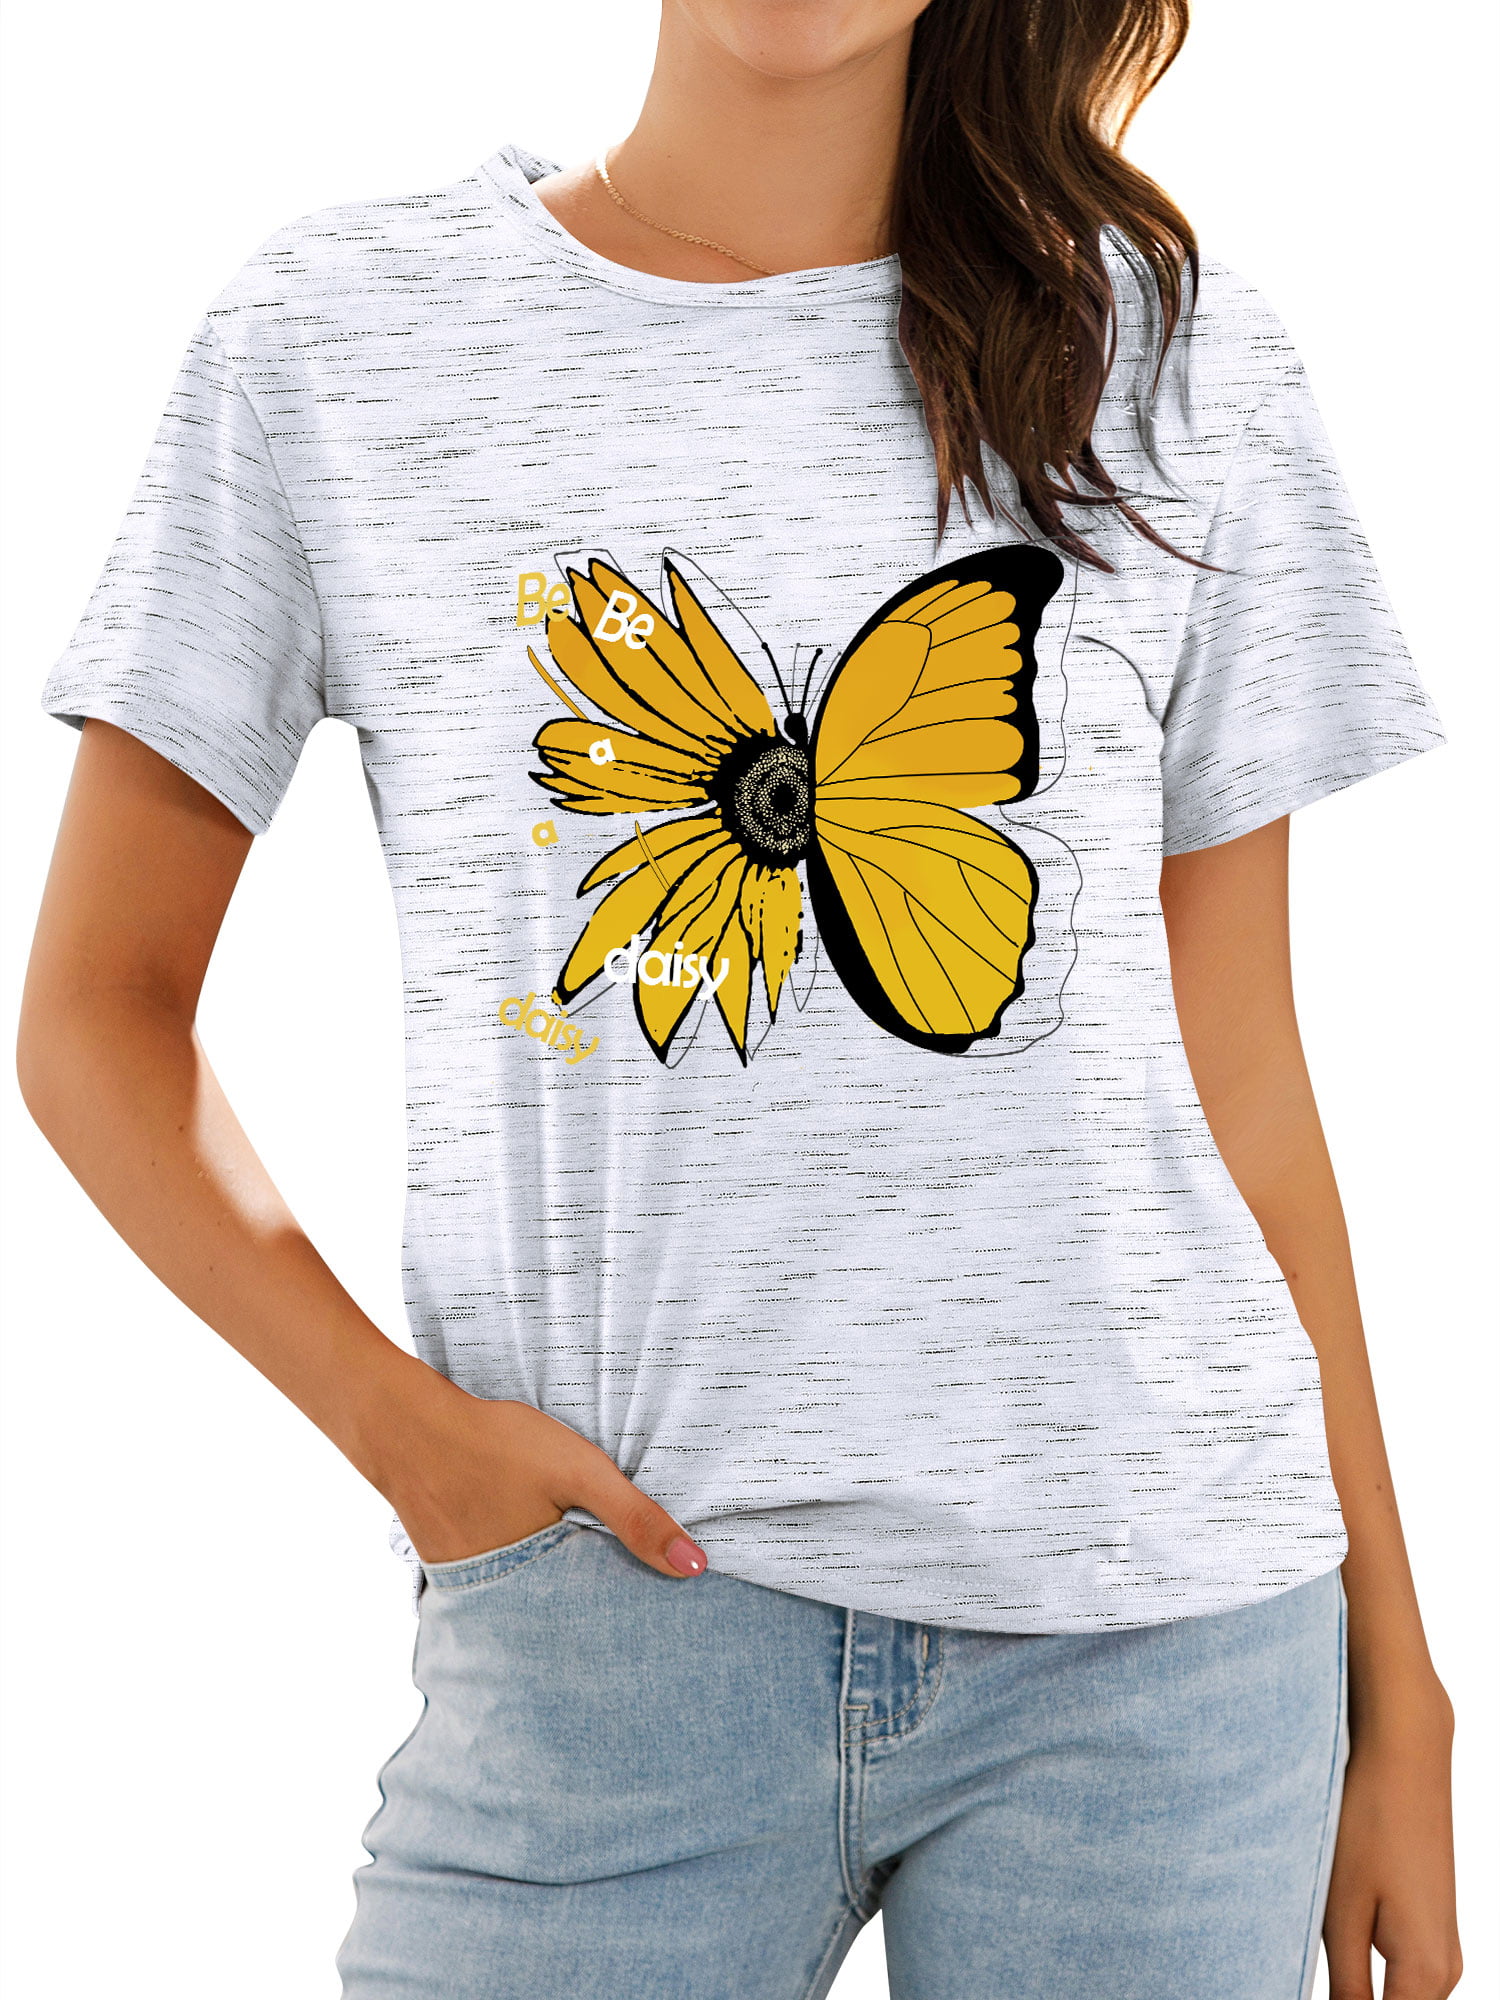 Twzh Women Butterfly Floral Graphic Print Be A Daisy Short Sleeve T